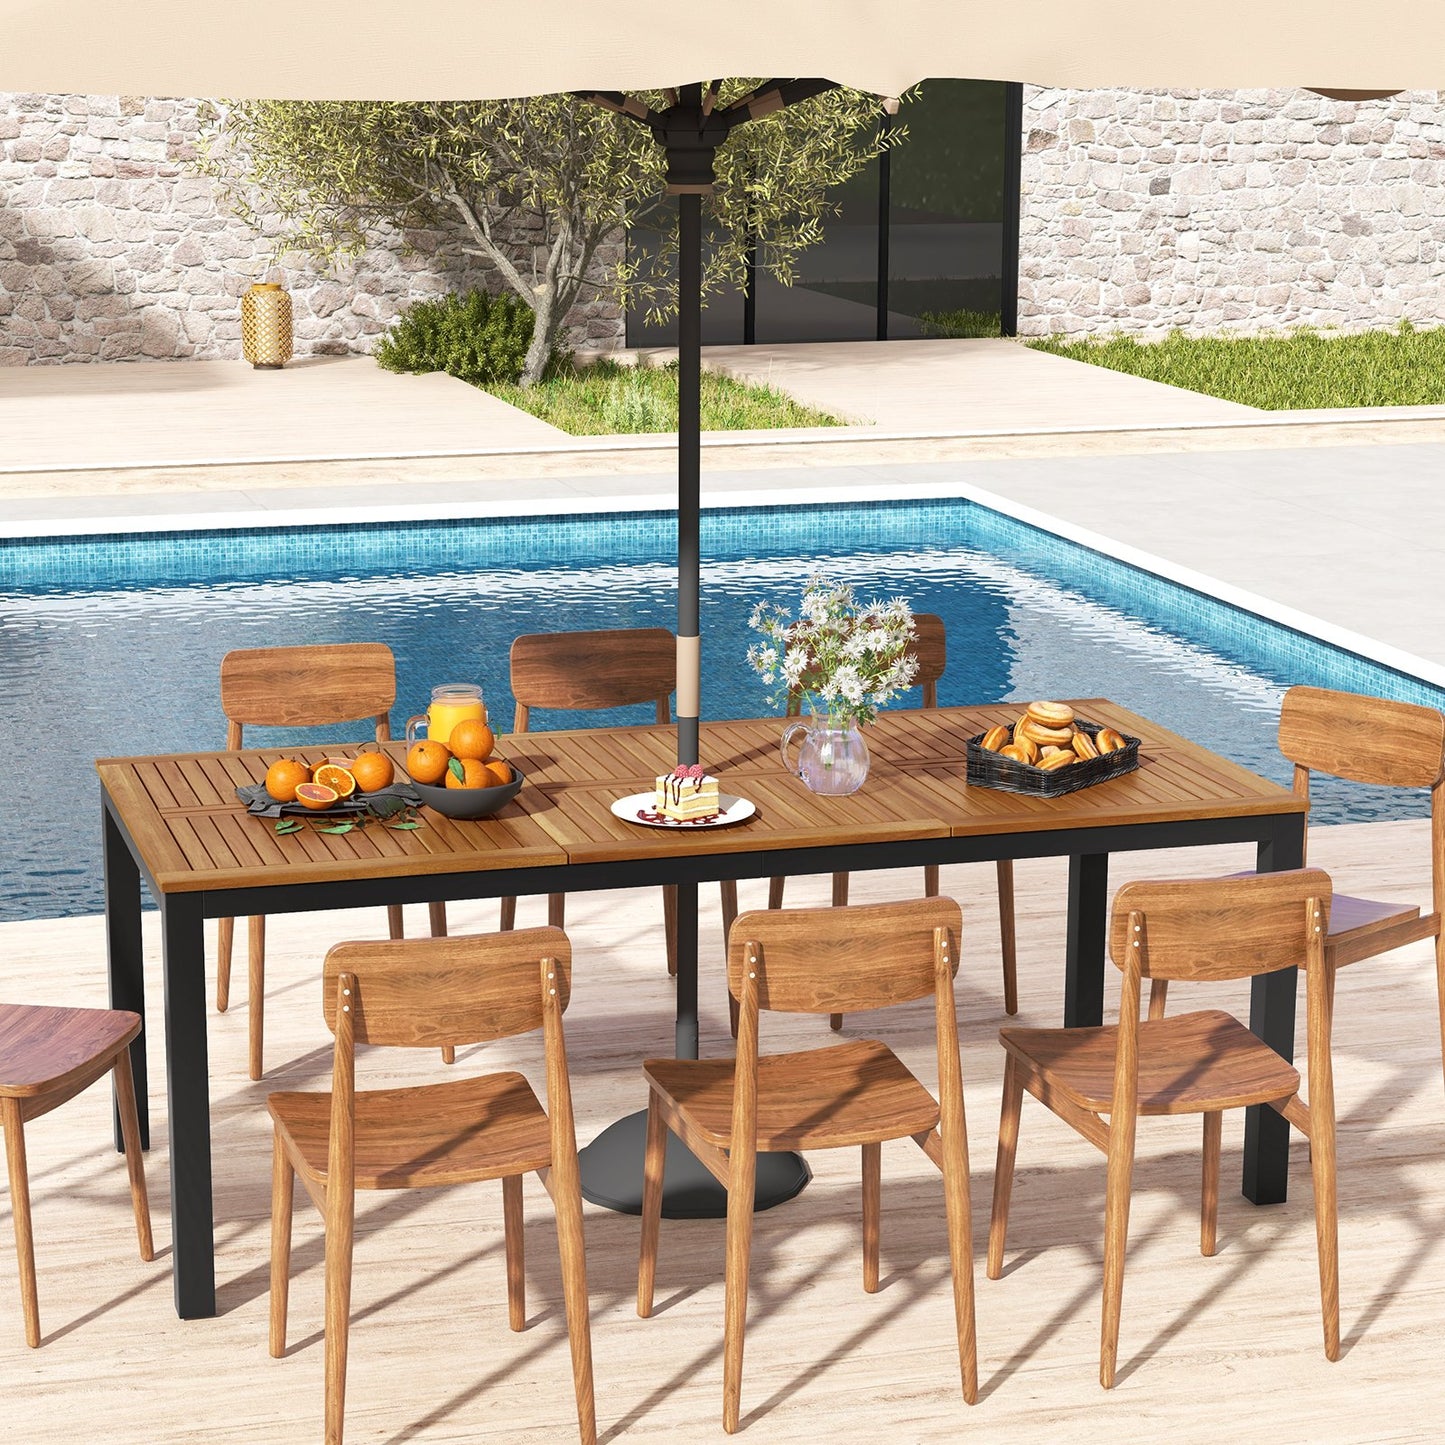 8-Person Outdoor Dining Table 79 Inch Acacia Wood Patio Table with Umbrella Hole, Natural